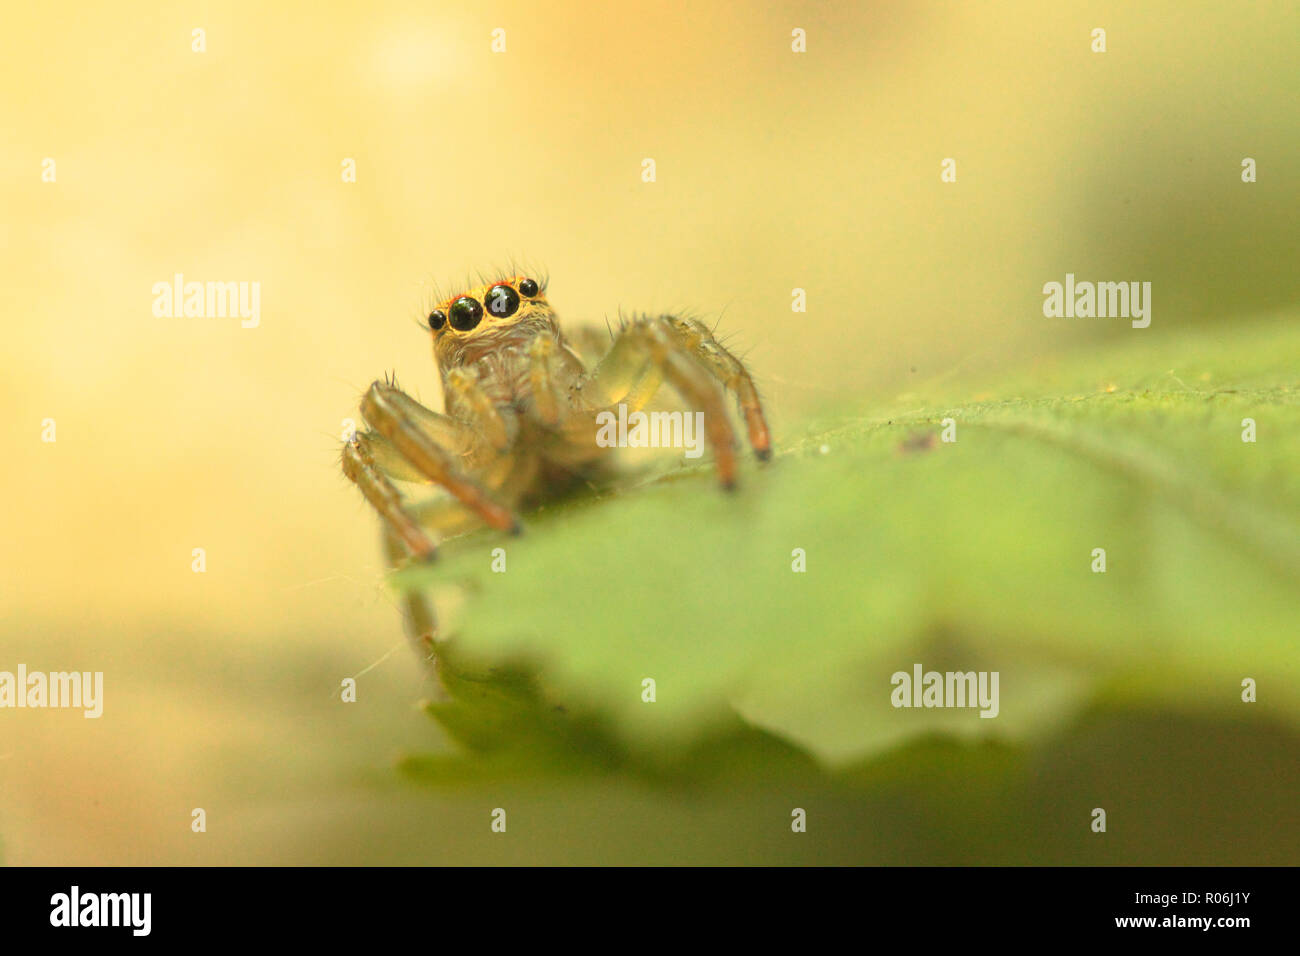 Shaanxi qinling jumping spiders Stock Photo